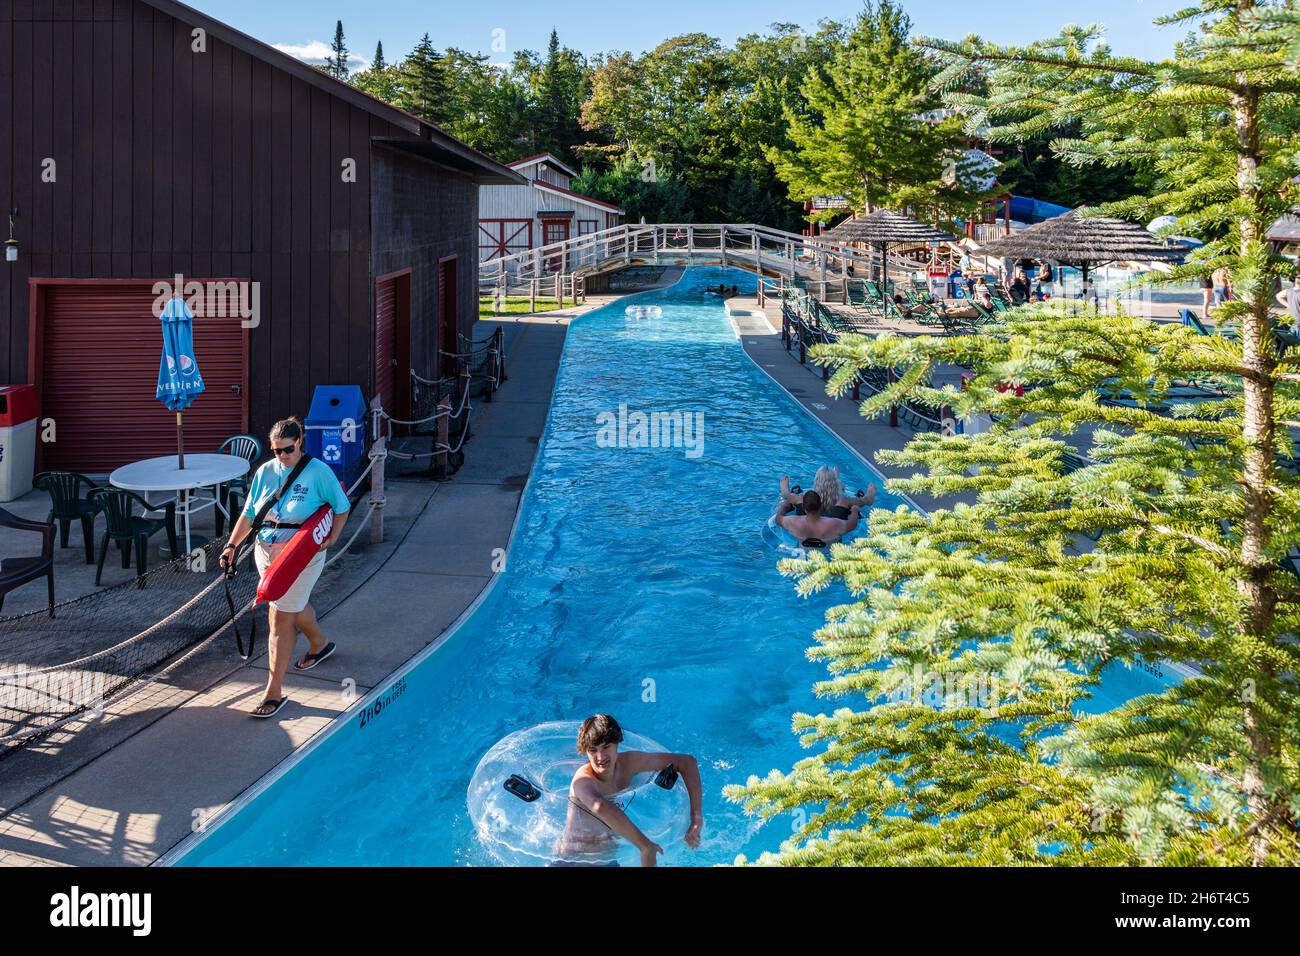 Old Forge, New York - September 4, 2021: Horizontal View of the Basin Stream of the Water Safari Park with People Swimming. Stock Photo